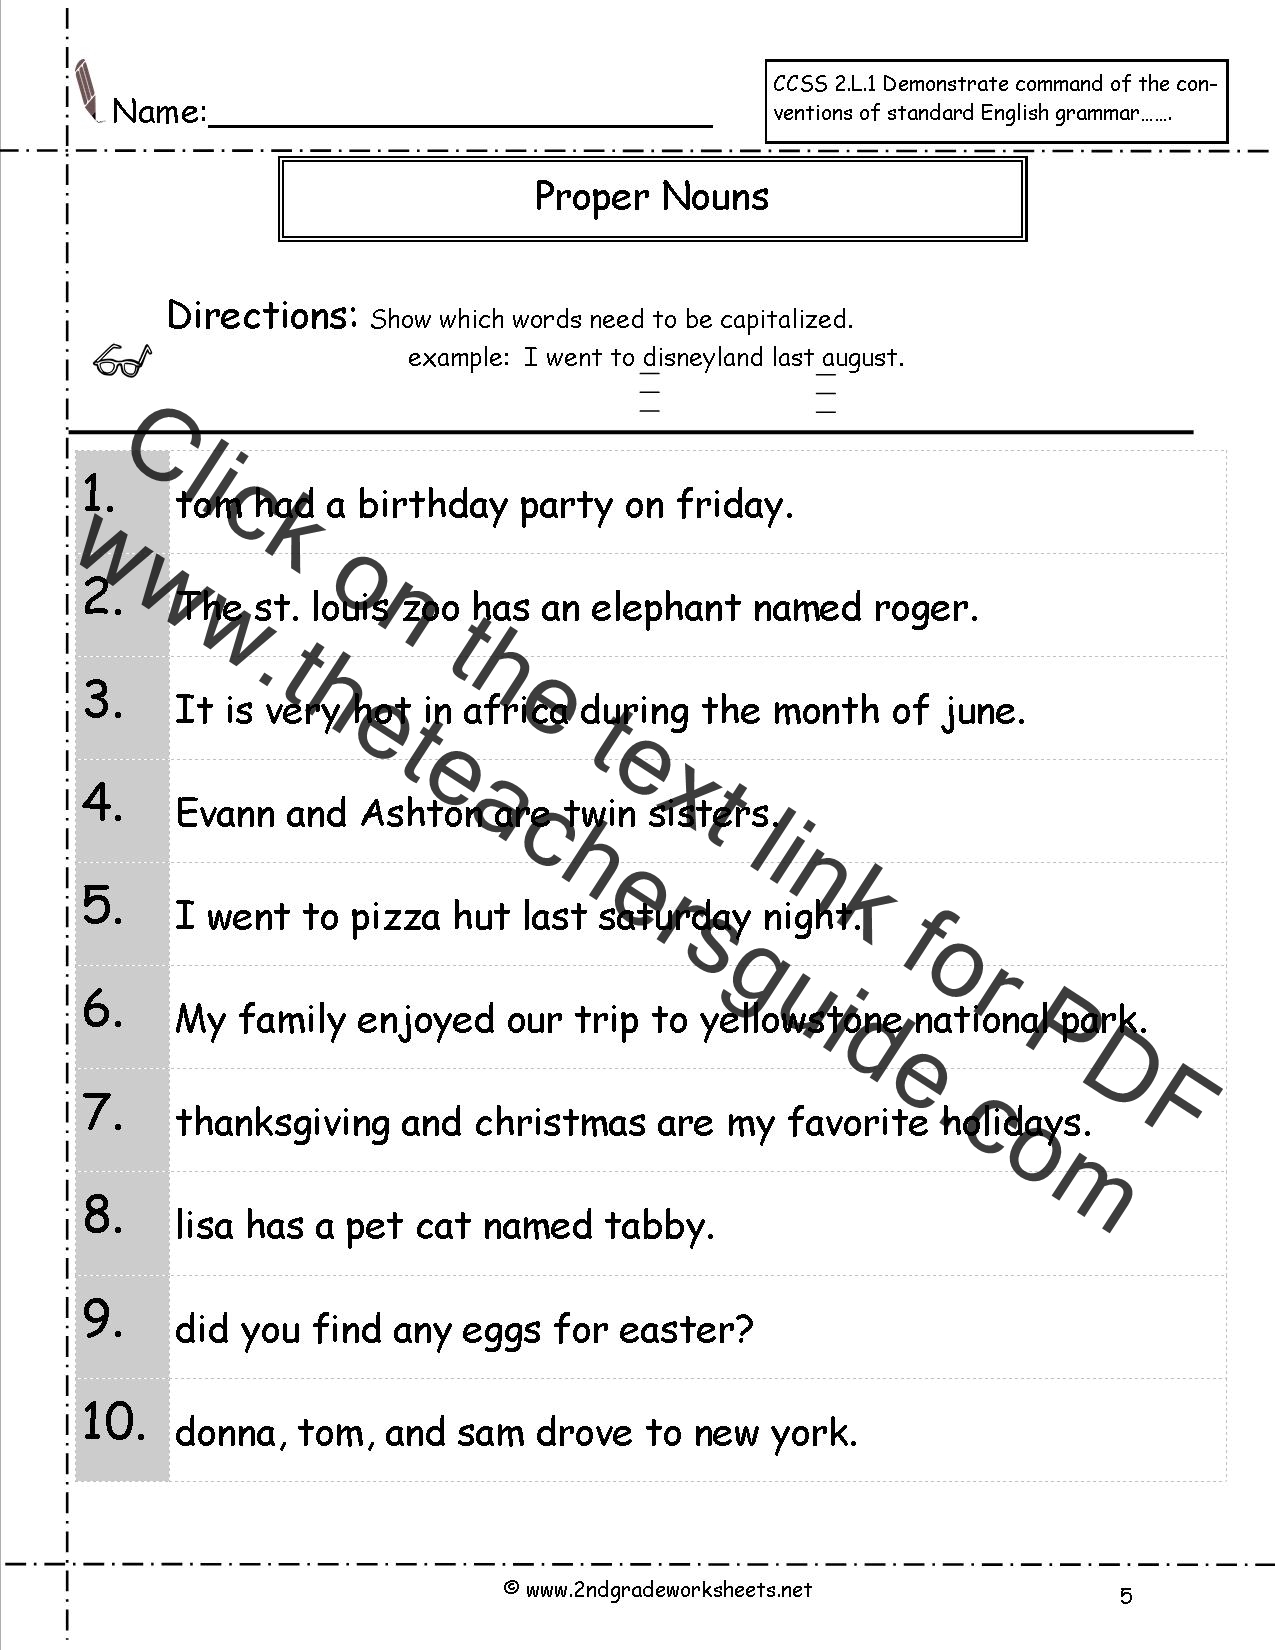 Common and Proper Nouns Worksheet With Regard To Proper Nouns Worksheet 2nd Grade